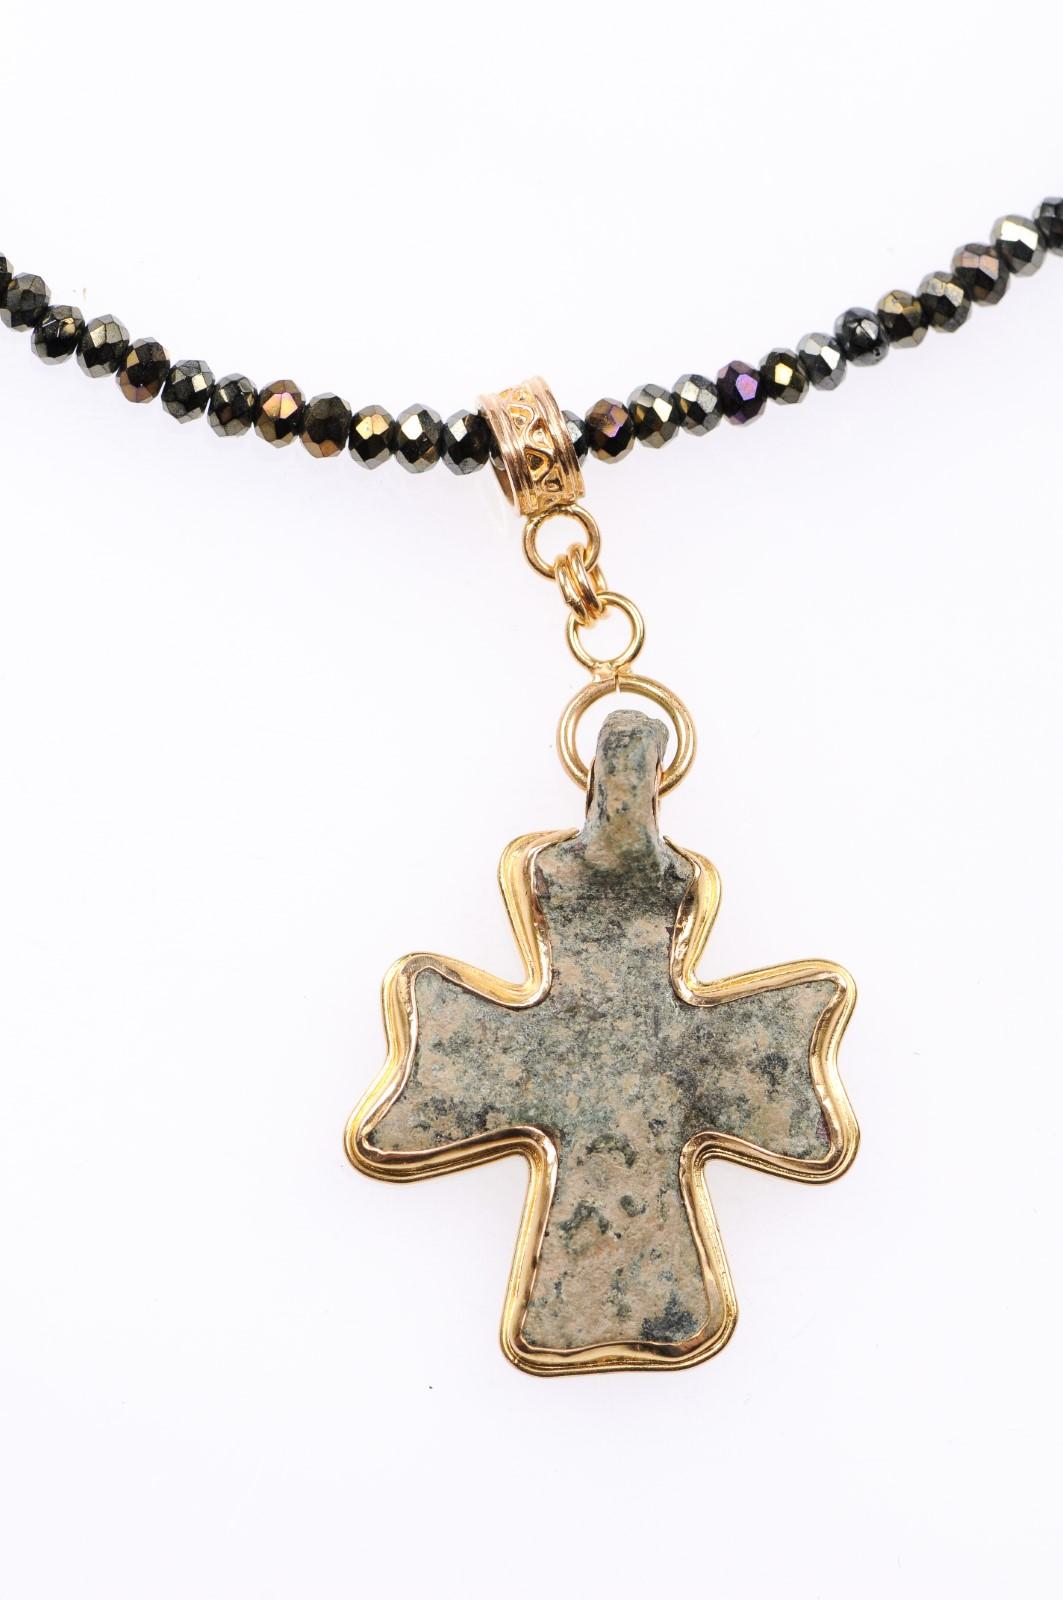 An authentic Byzantine era bronze cross, (4th-6th century AD), with the contemporary addition of the 21-karat gold bezel. This ancient Byzantine cross of bronze has a rich, green patina and is set in a custom 21-karat solid gold pendant with hanging